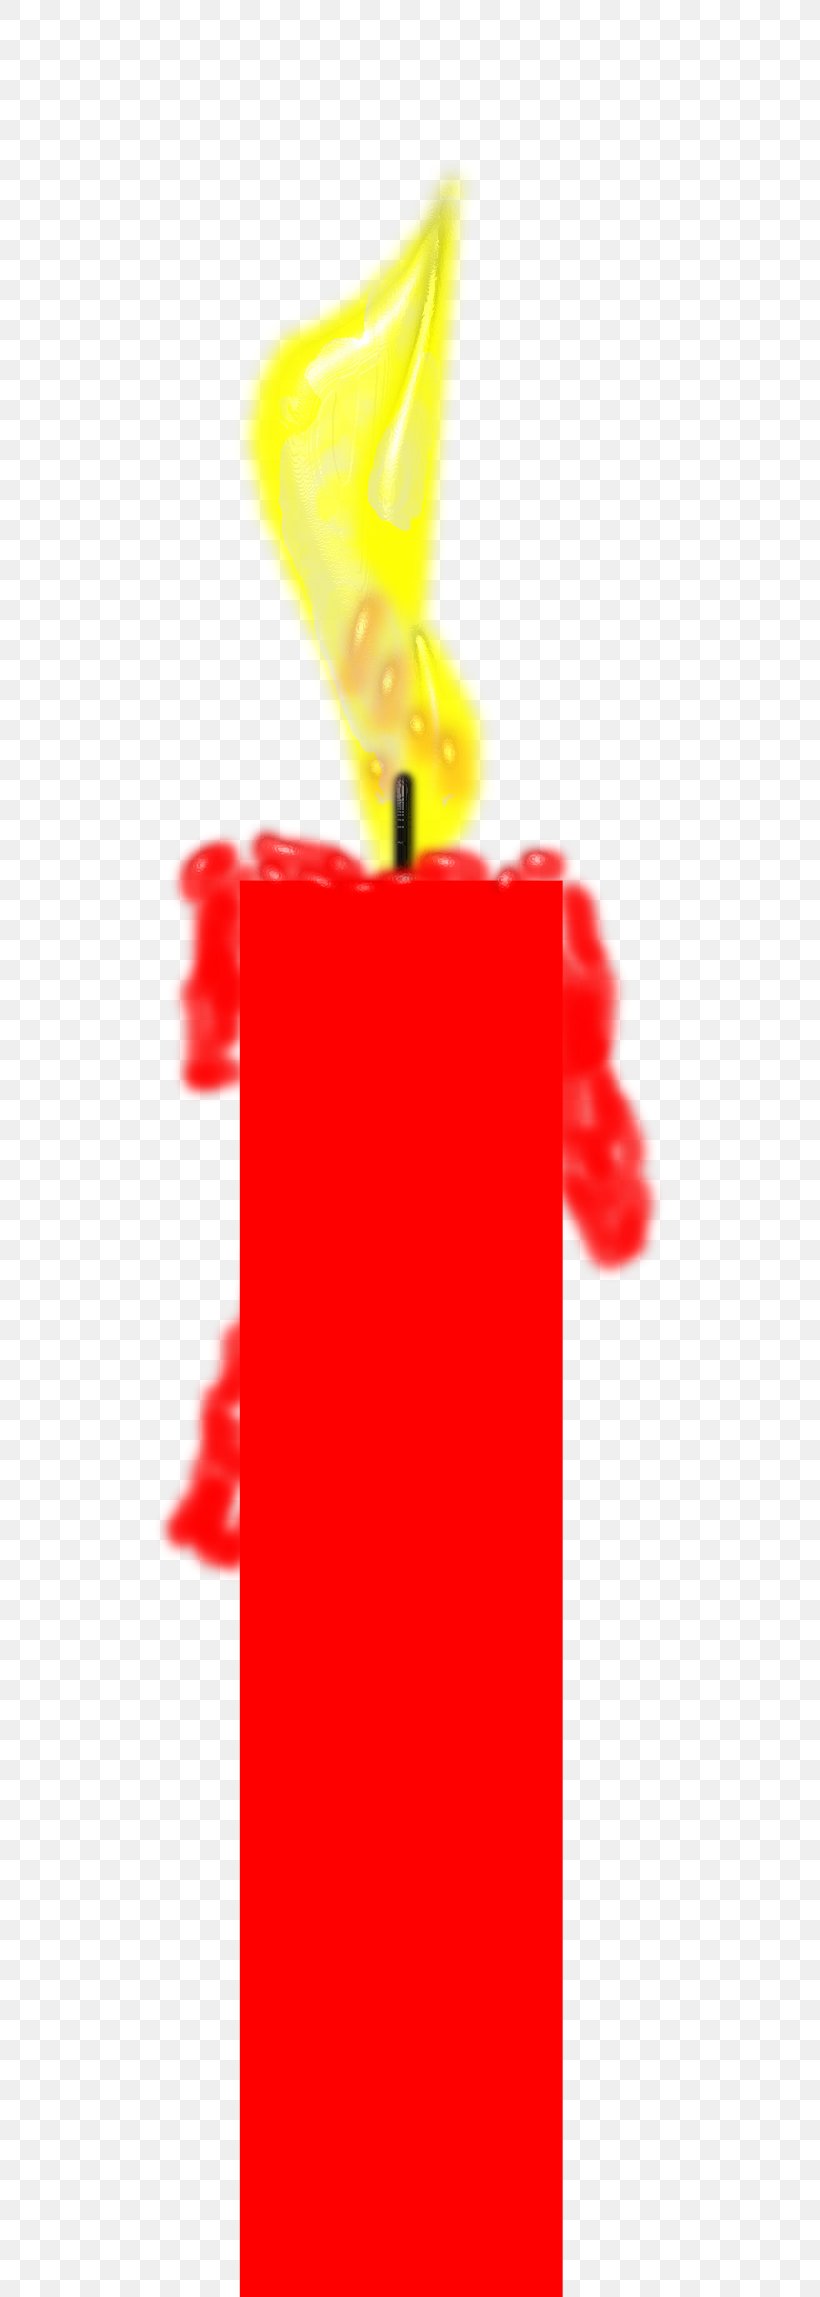 Candle Cocktail Garnish YouTube Clip Art, PNG, 512x2297px, Candle, Birthday, Cocktail Garnish, Drawing, Drink Download Free